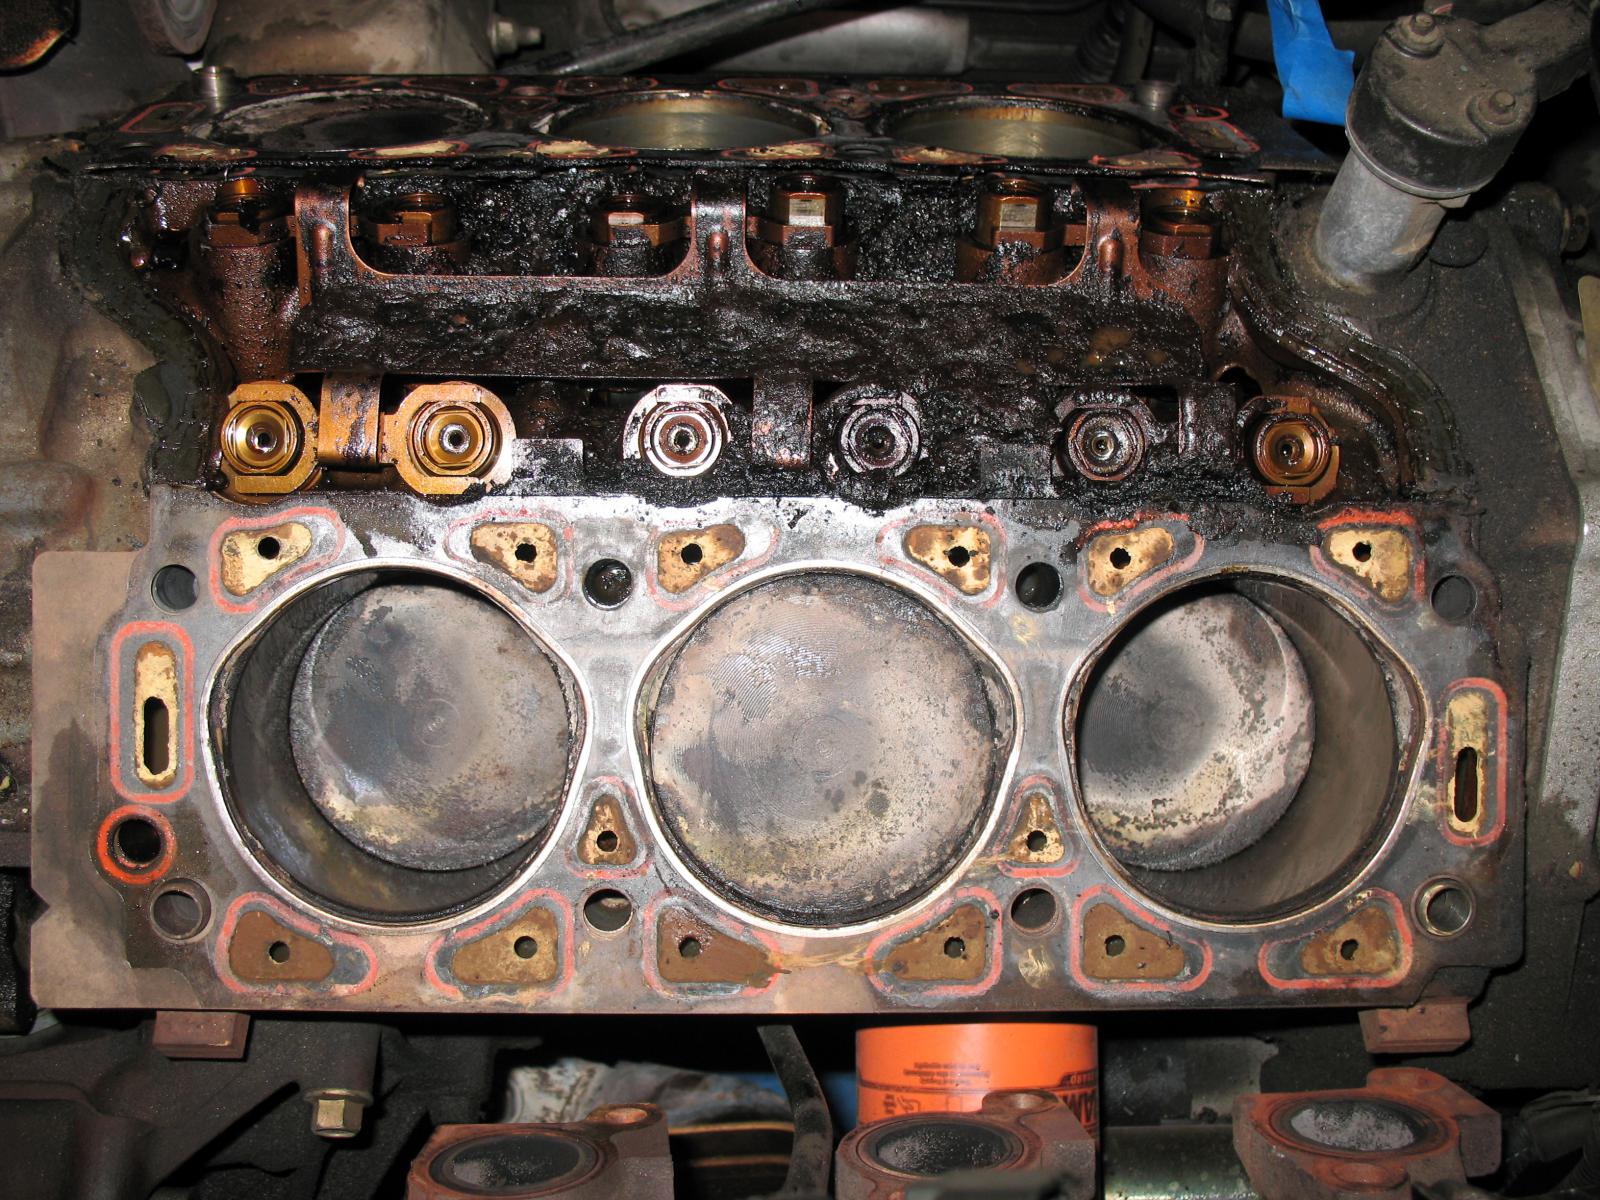 How Much Does A Head Gasket Repair Cost Last Chance